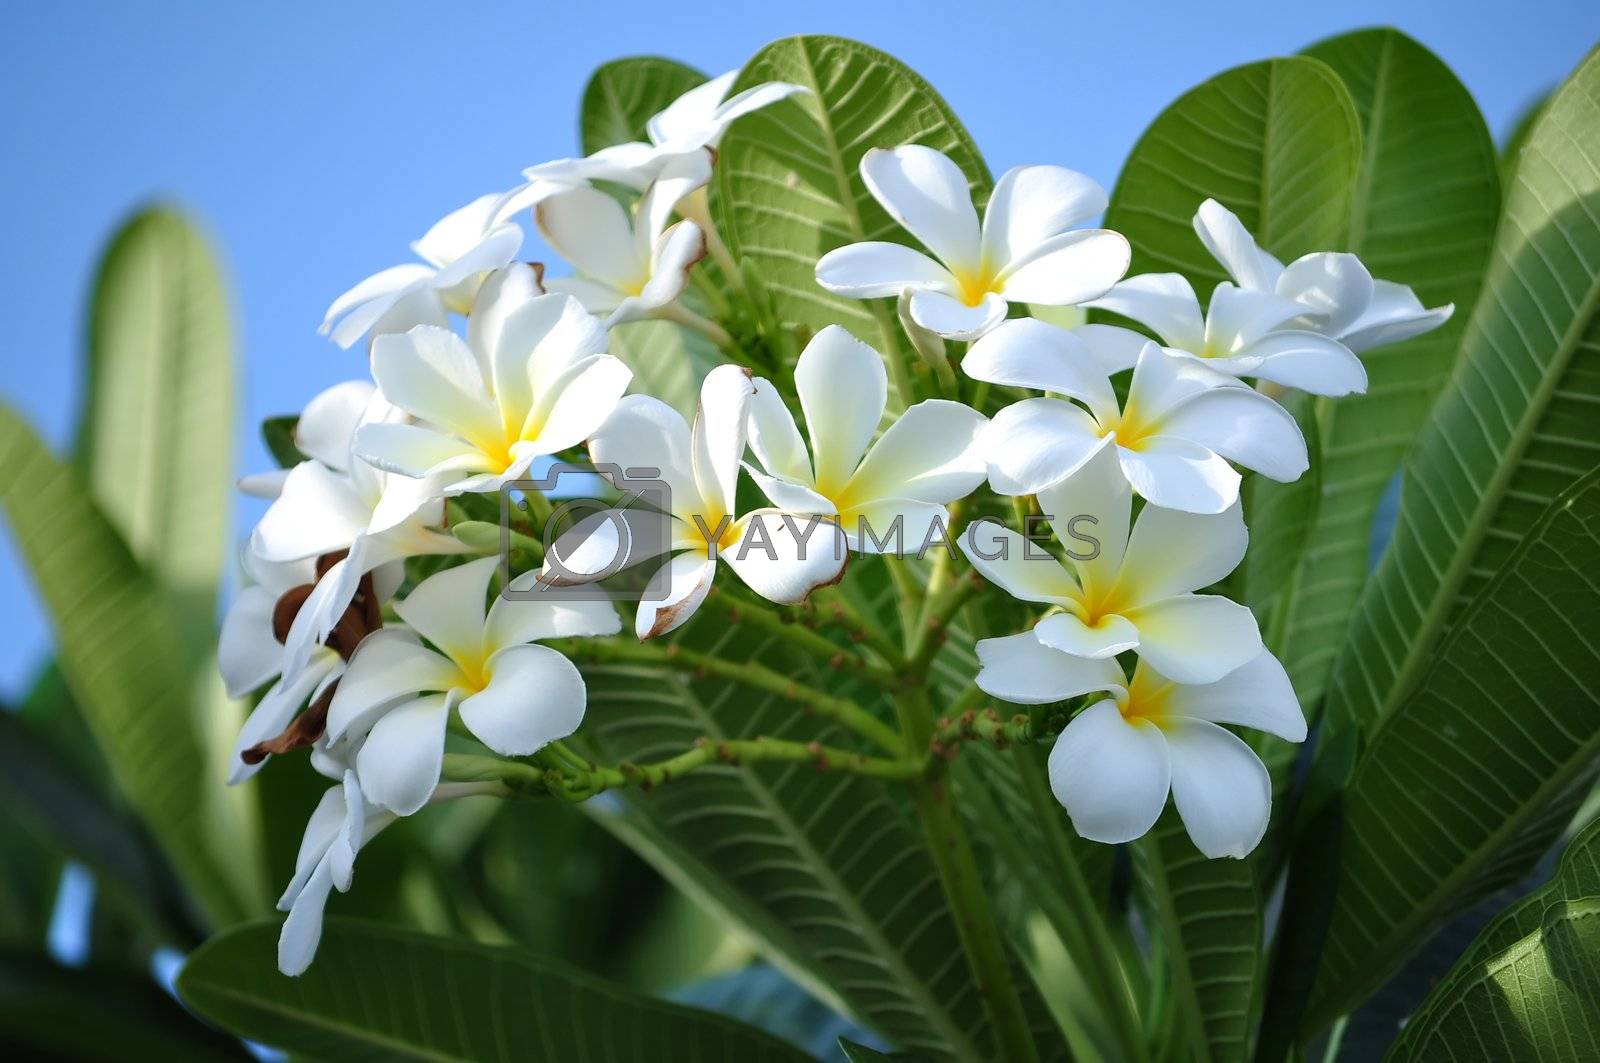 Royalty free image of Plumeria by MaZiKab